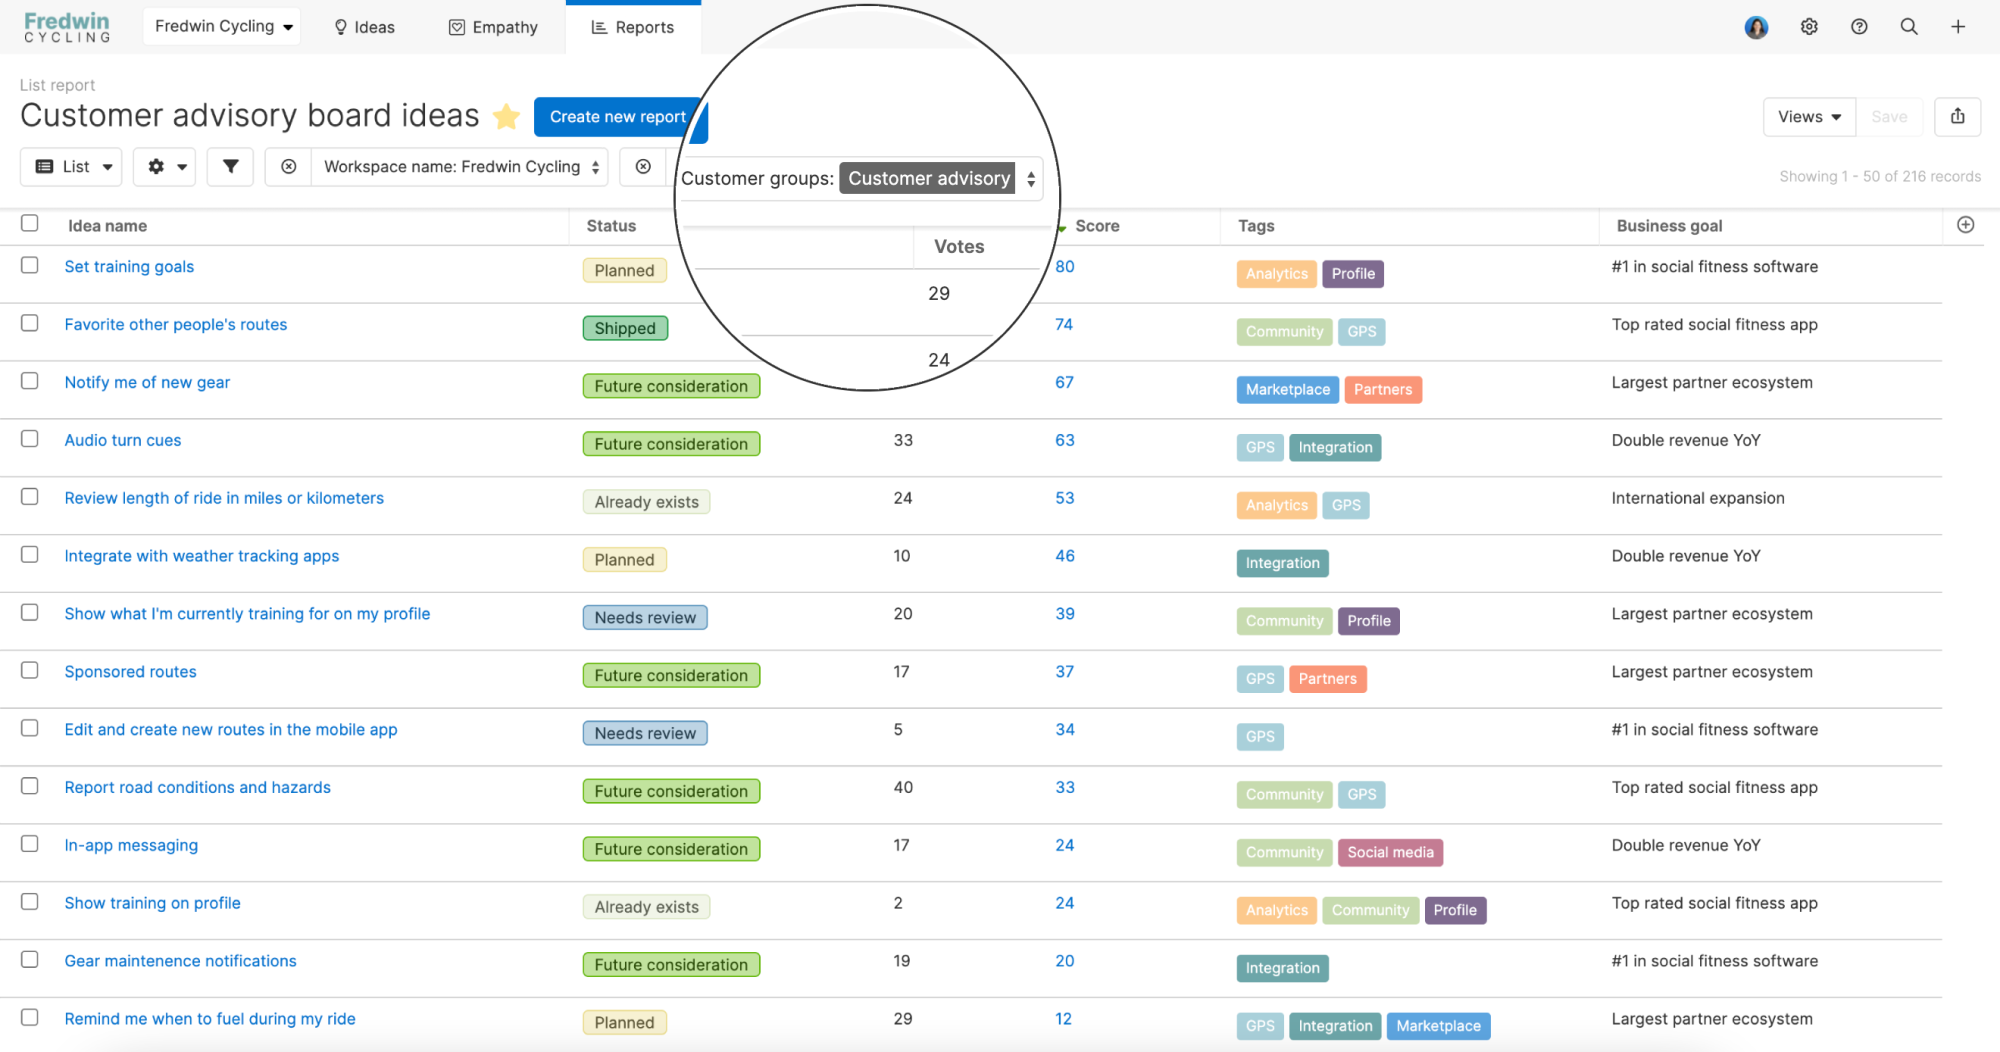 Filter your reports by attribute to understand feedback trends across specific groups of people. 